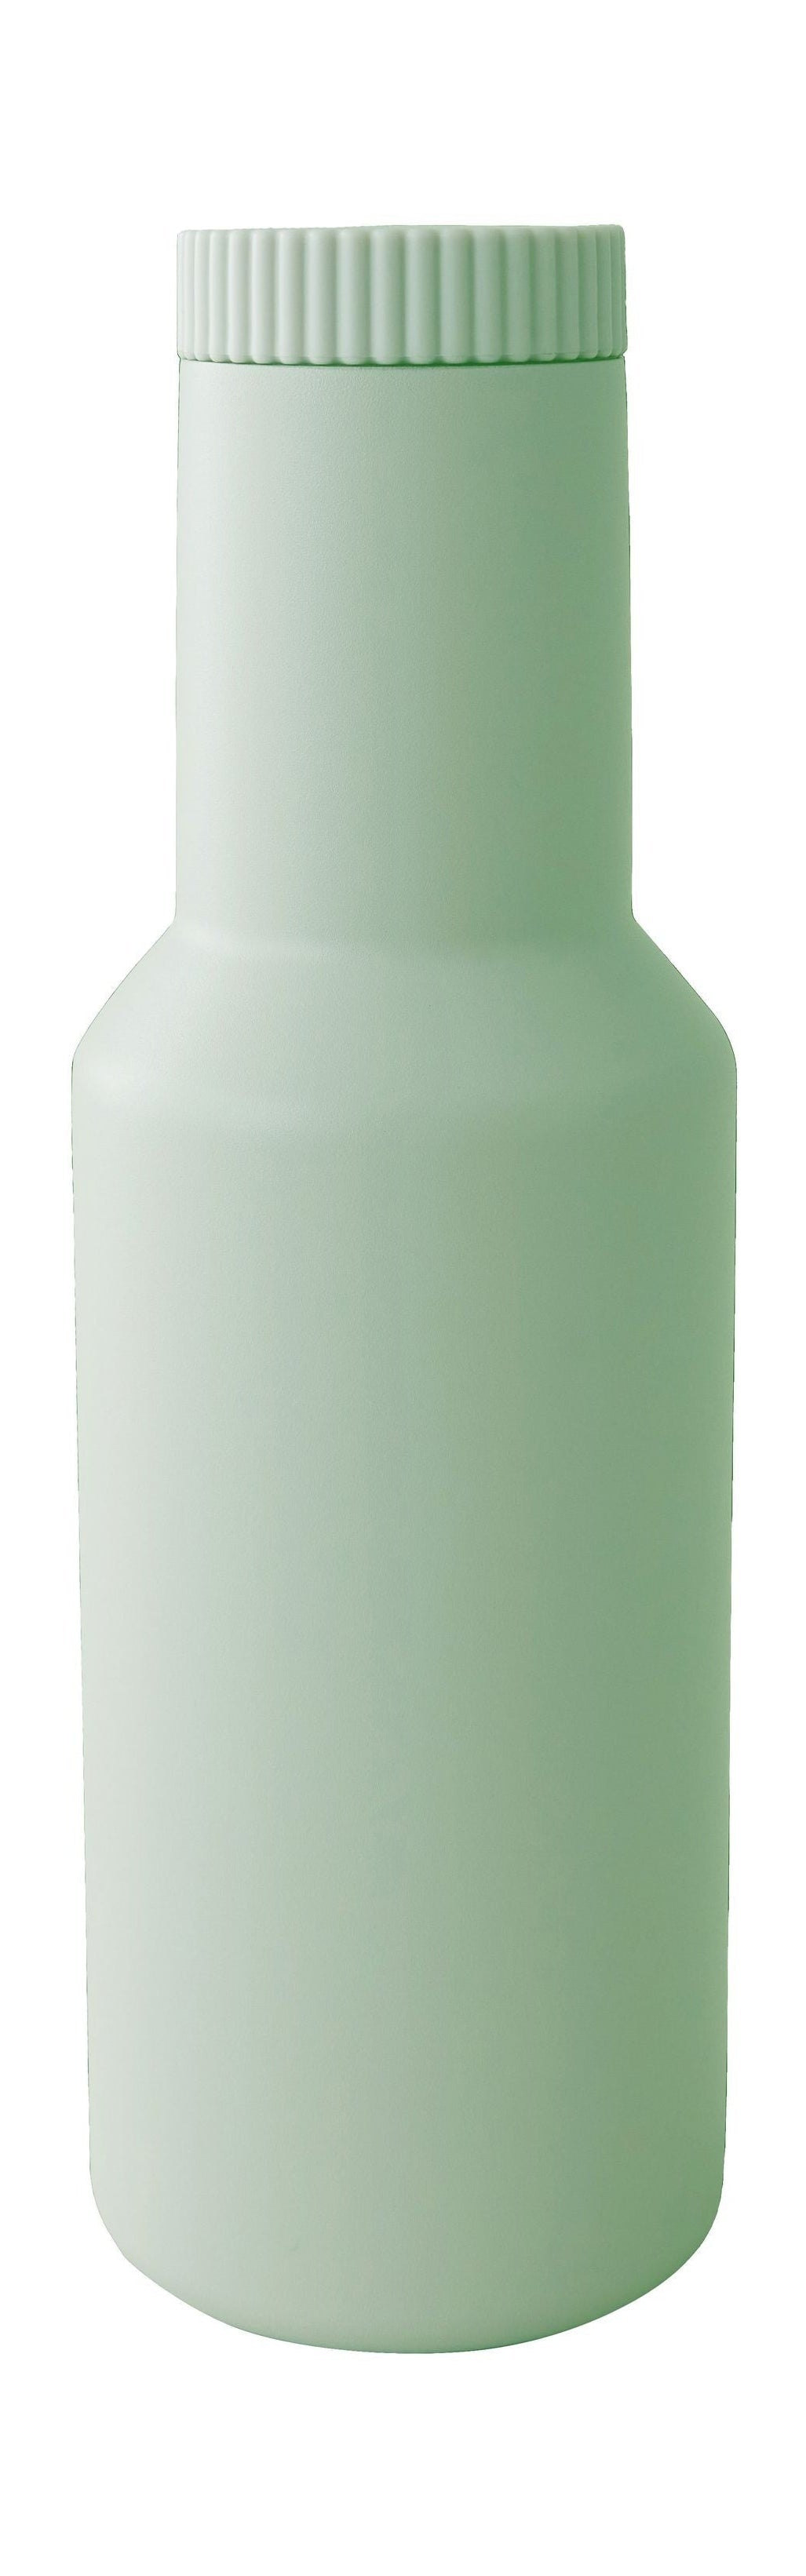 Design Letters Tube Thermo Carafe, Green